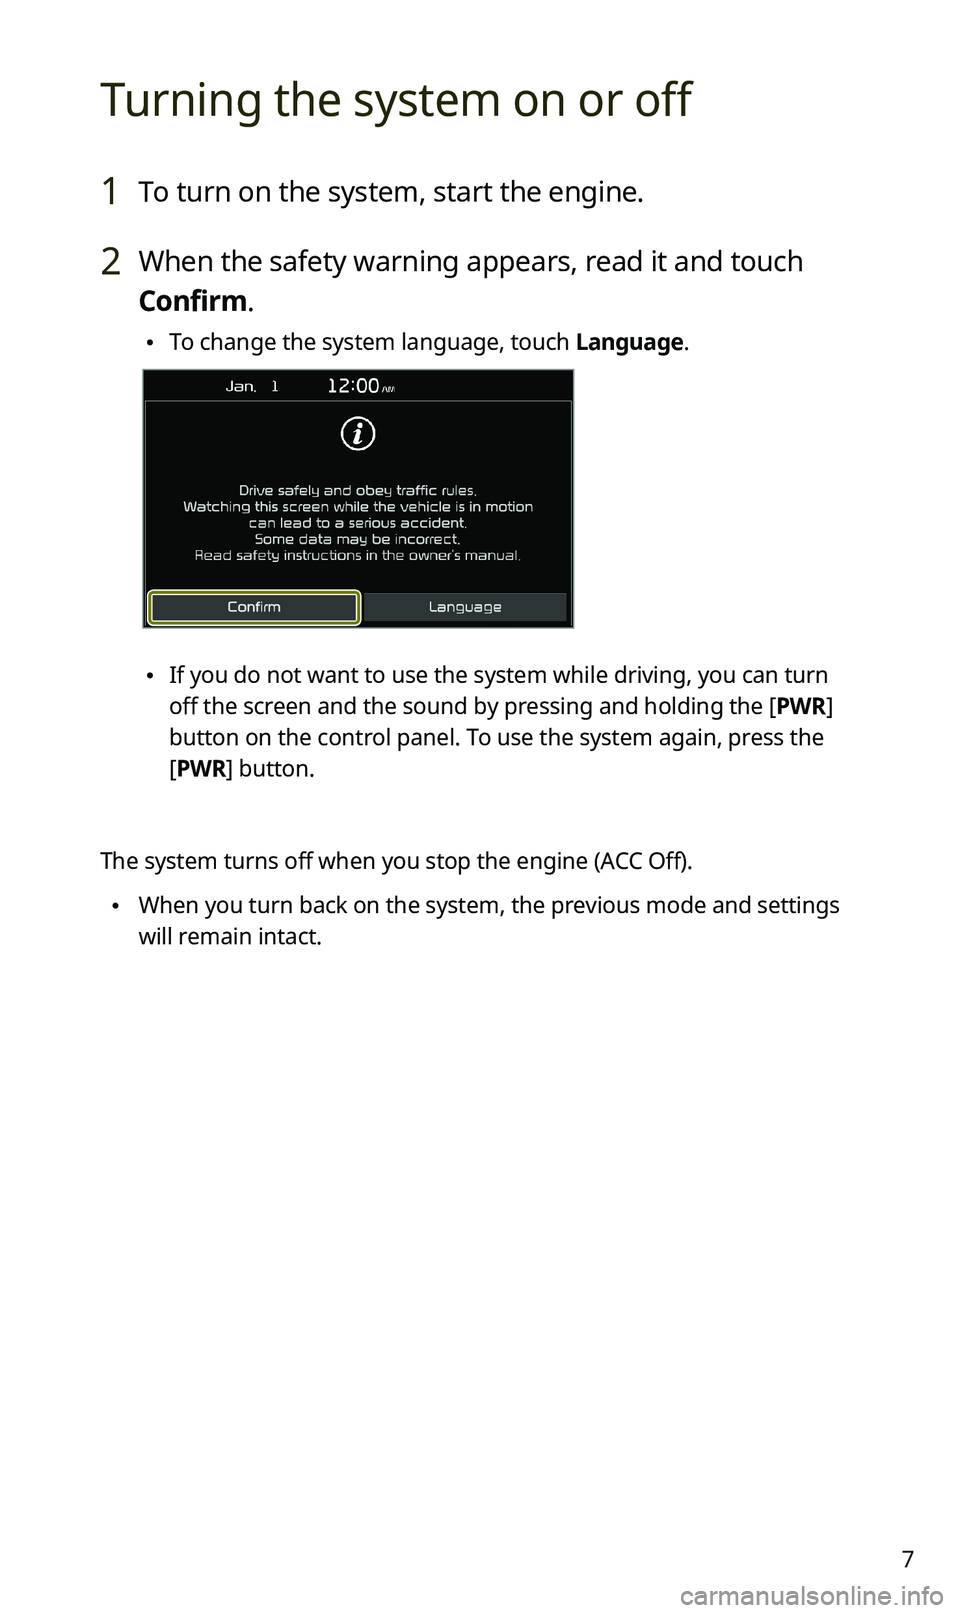 KIA SPORTAGE 2020  Quick Reference Guide 7
Turning the system on or off
1 To turn on the system, start the engine.
2 When the safety warning appears, read it and touch 
Confirm.
 •To change the system language, touch Language.
 •If you d